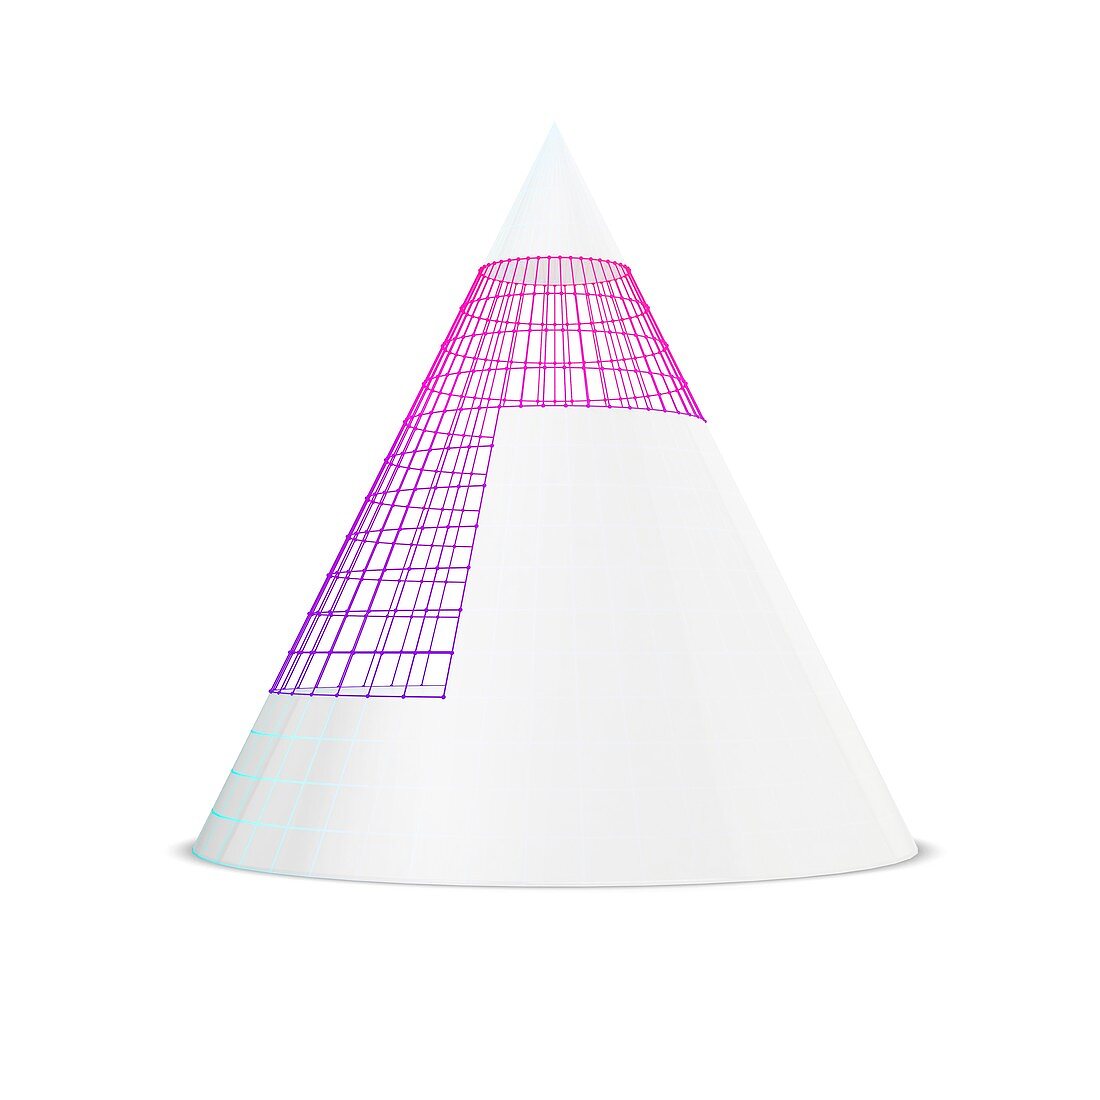 White cone with visible wireframe, illustration